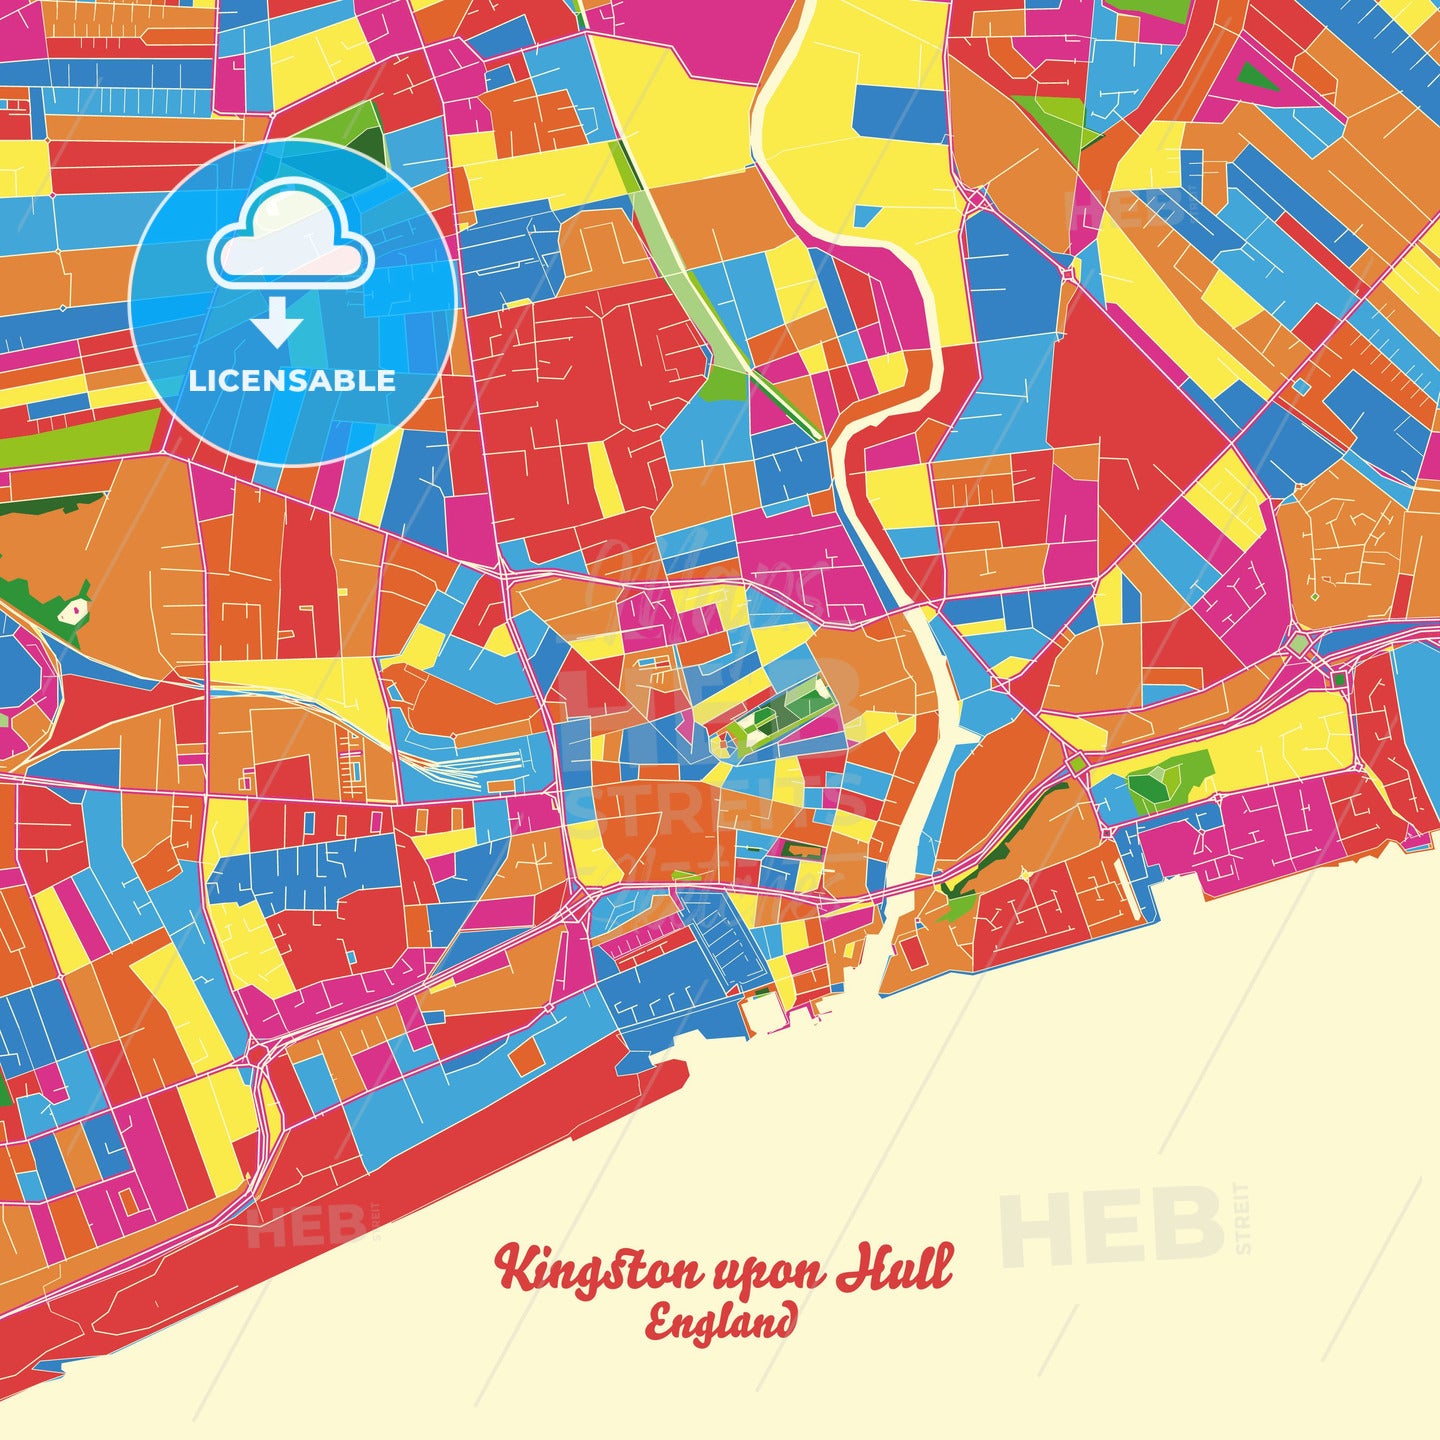 Kingston upon Hull, England Crazy Colorful Street Map Poster Template - HEBSTREITS Sketches